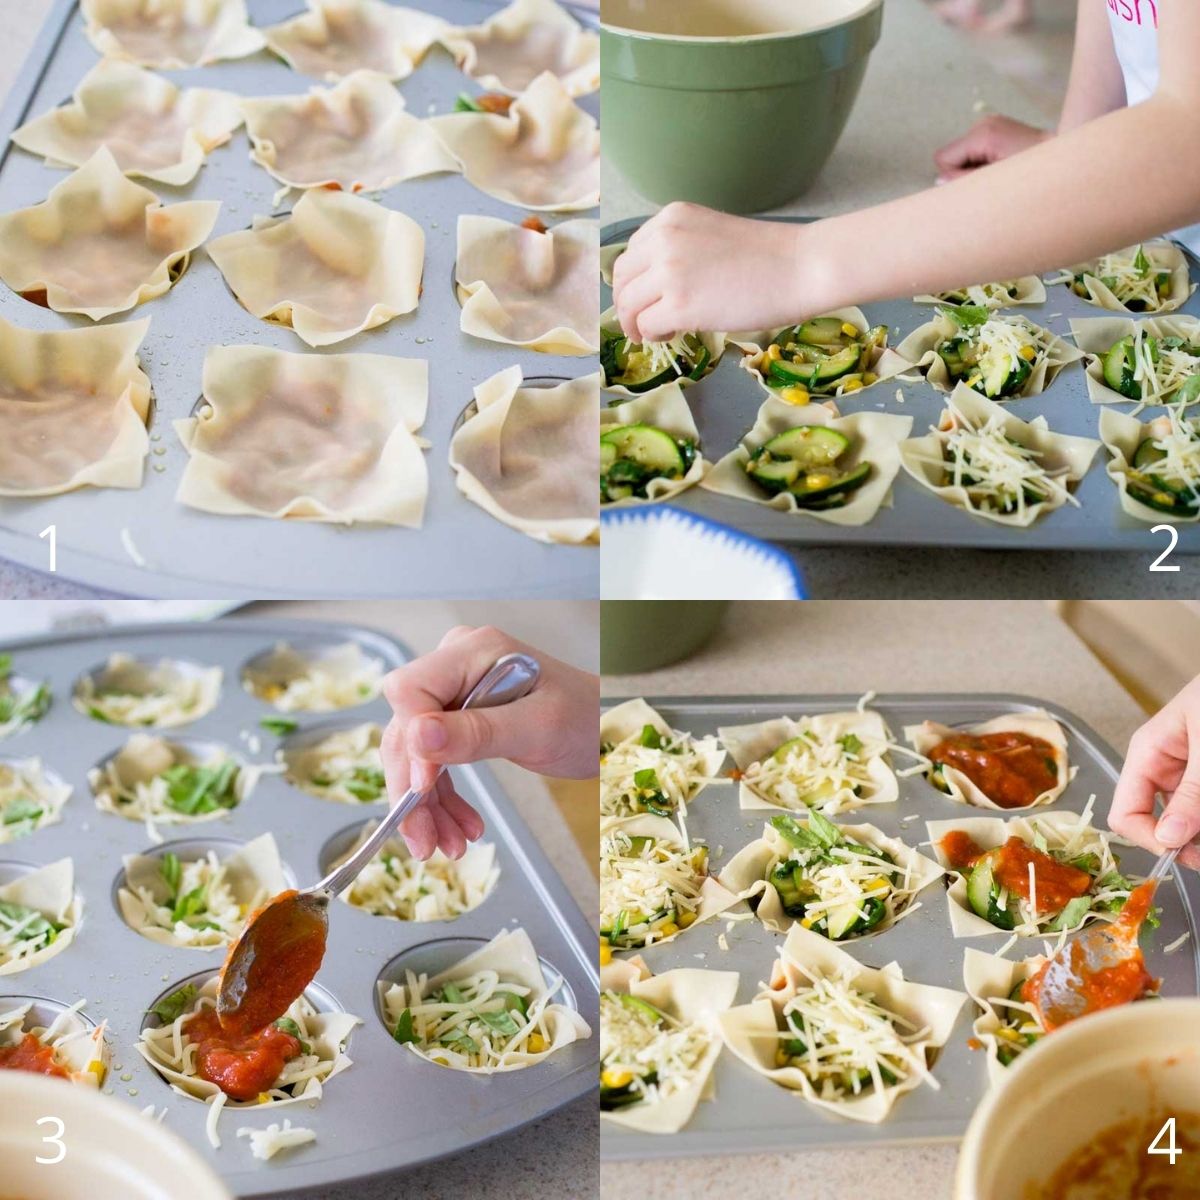 Step by step photos show how to assemble the garden lasagna cupcakes in a muffin tin.